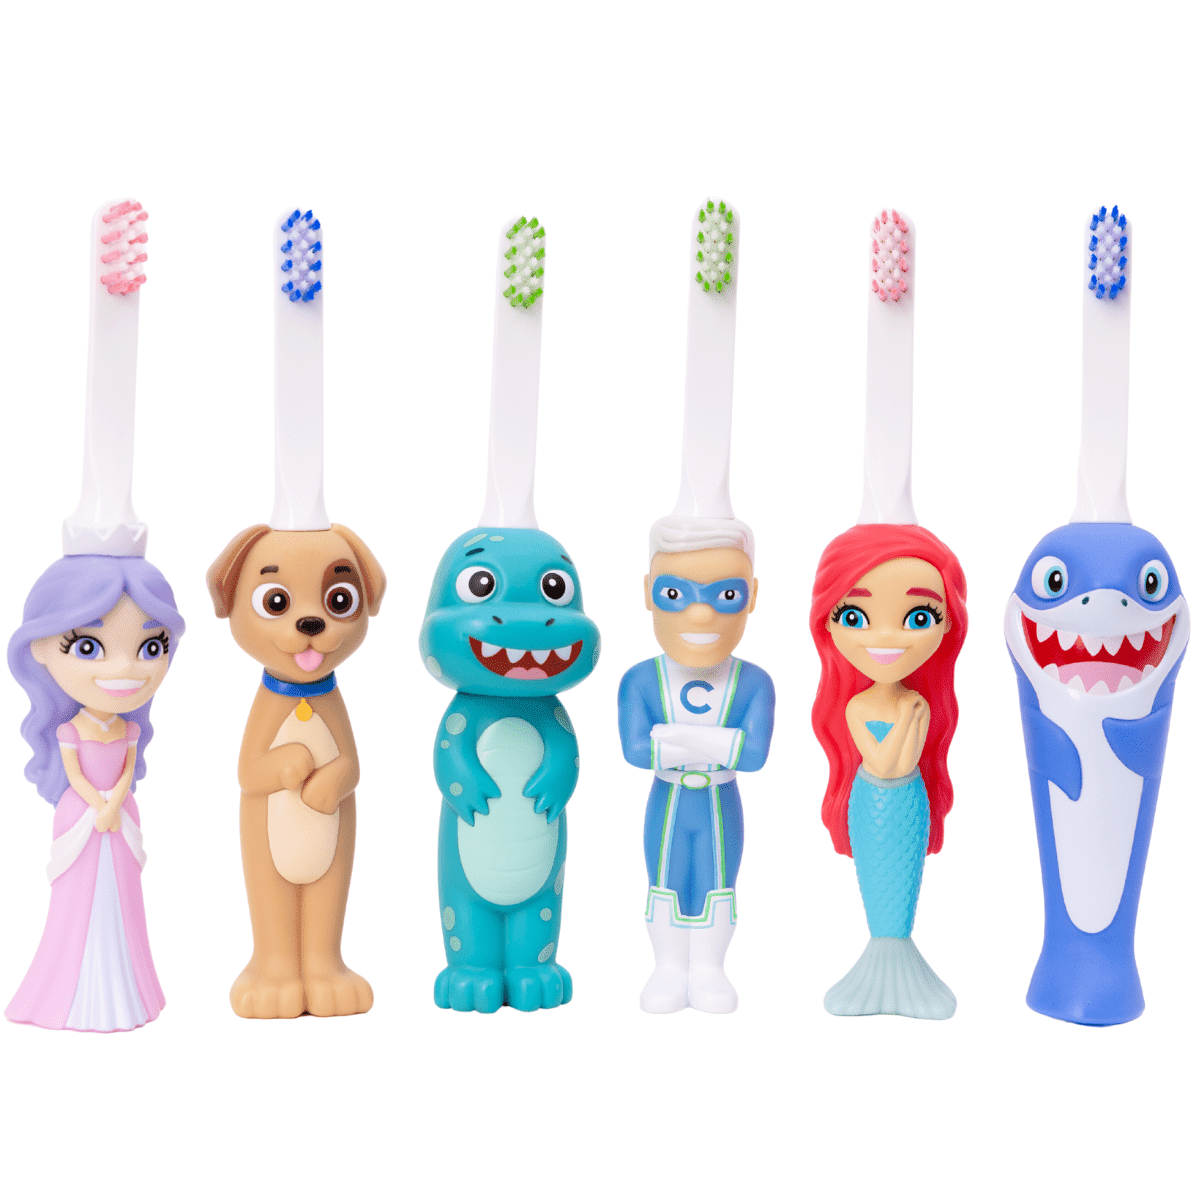 all 6 Toothbrush Toy characters